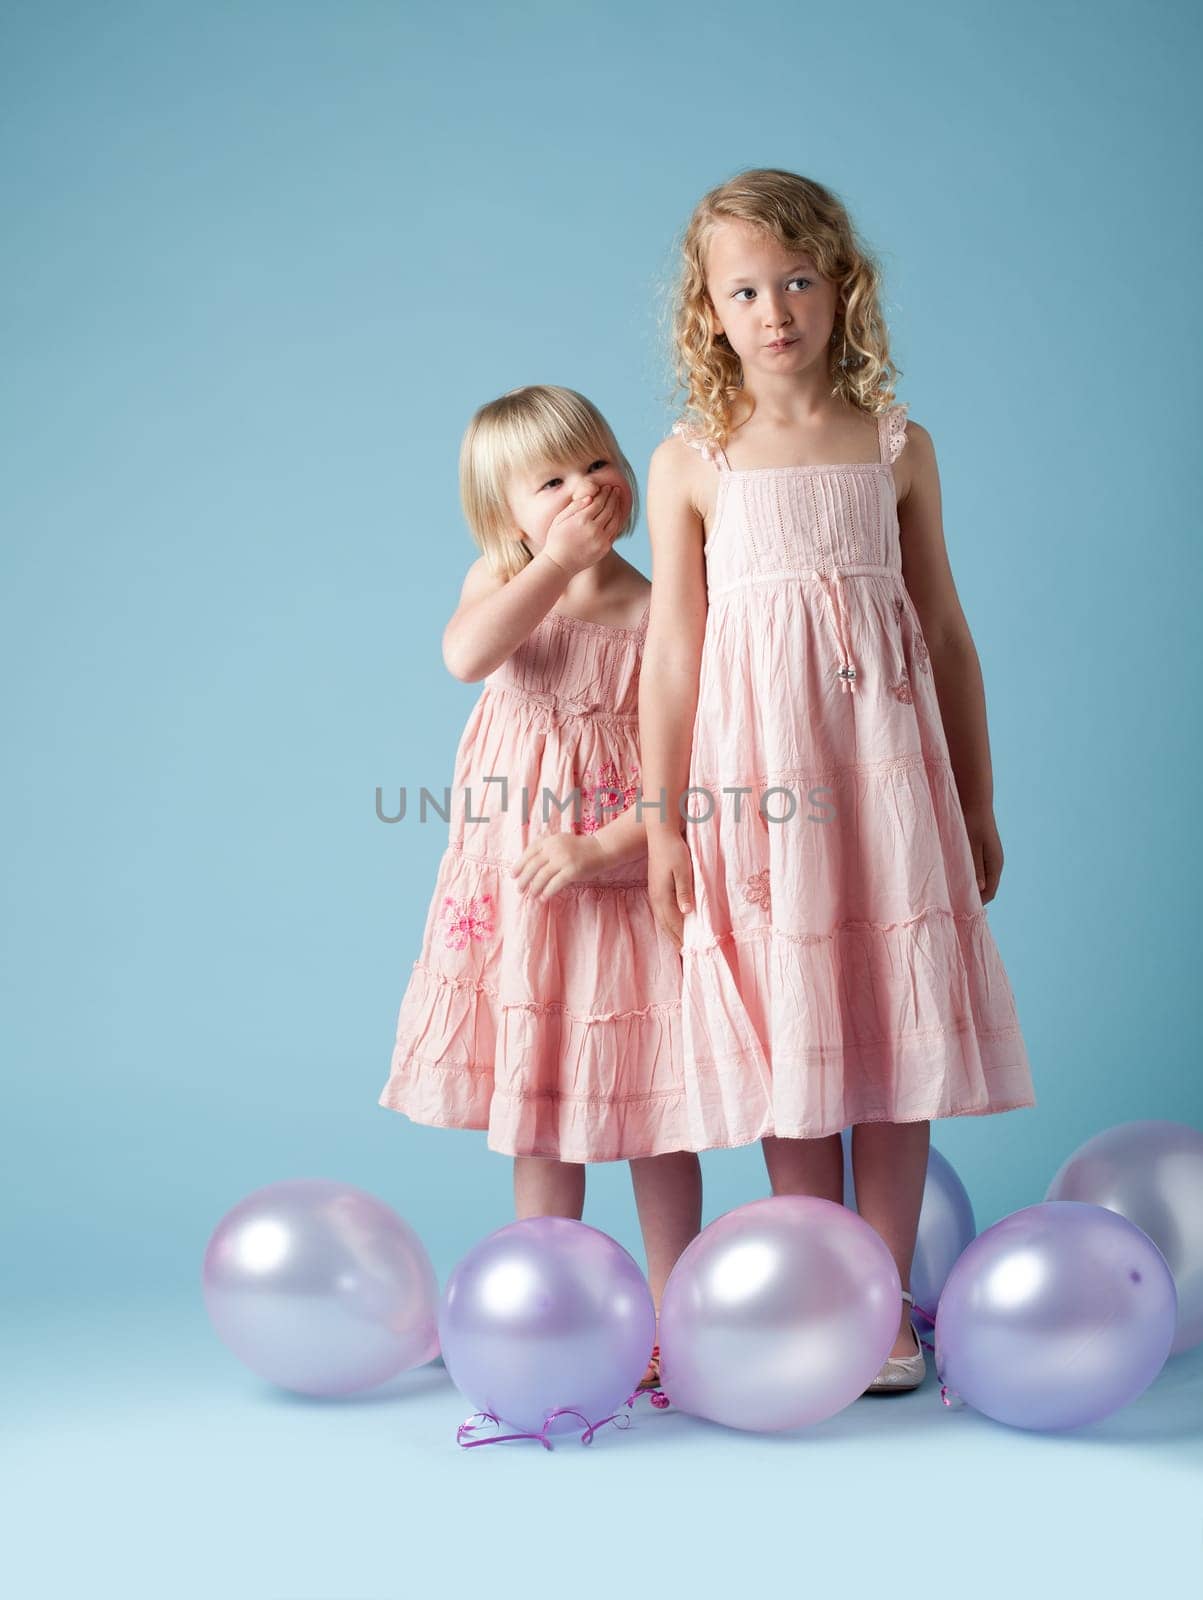 Kids, sisters and studio with balloons for fashion or development, laugh or thinking with clothes. Children, girls and inflatable on backdrop with style for youth, happy in London or England with fun.